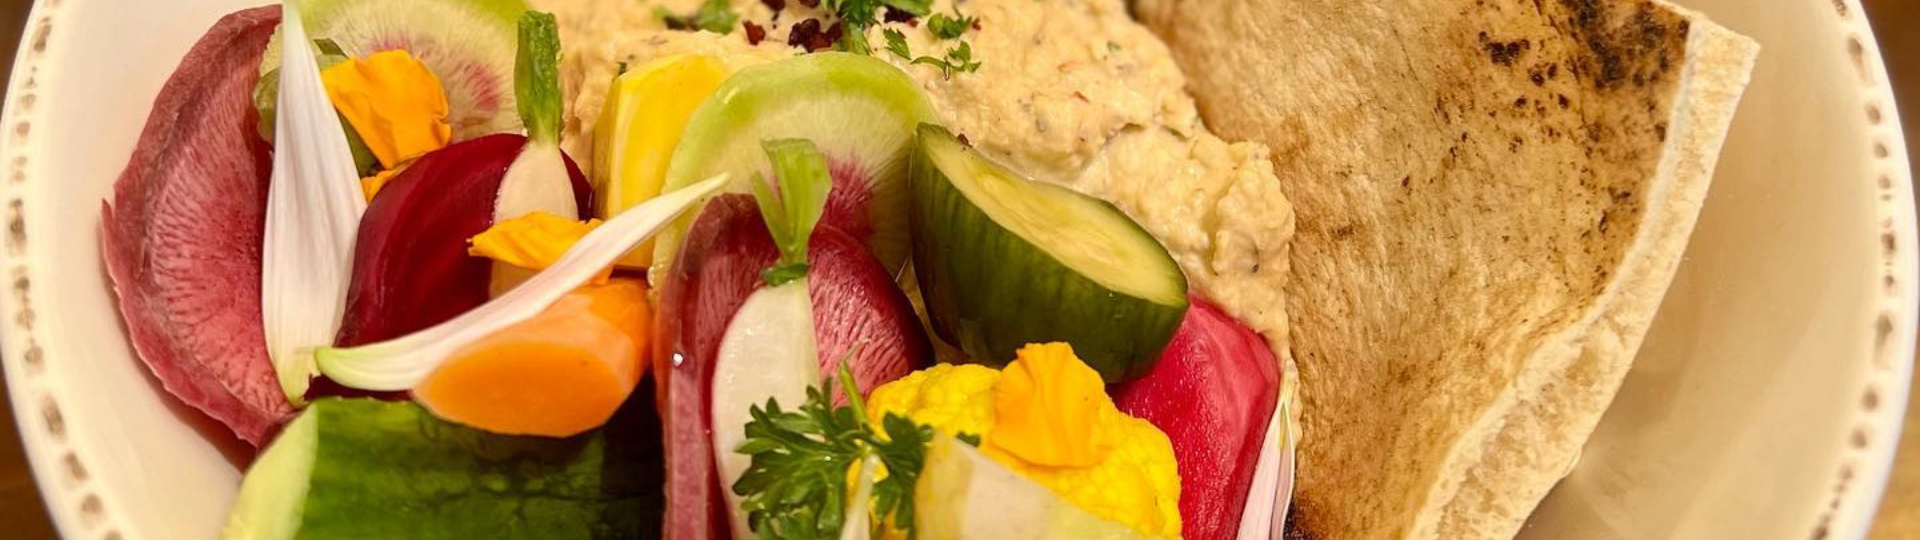 Spread Kitchen hummus plate with vegetables